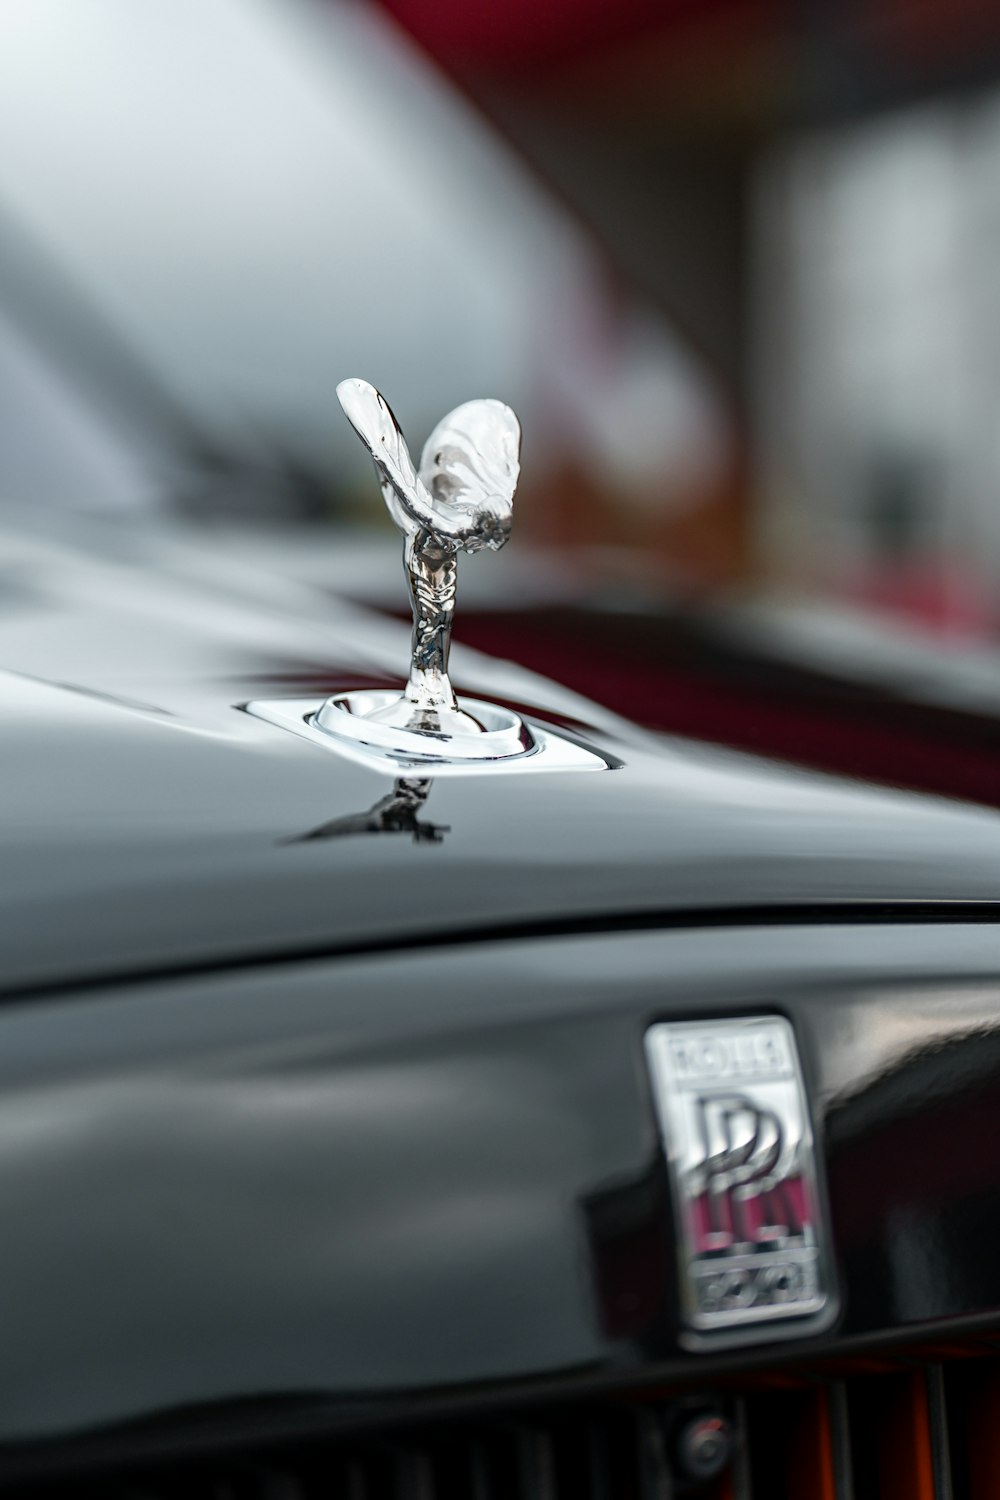 a close up of the hood ornament on a black car